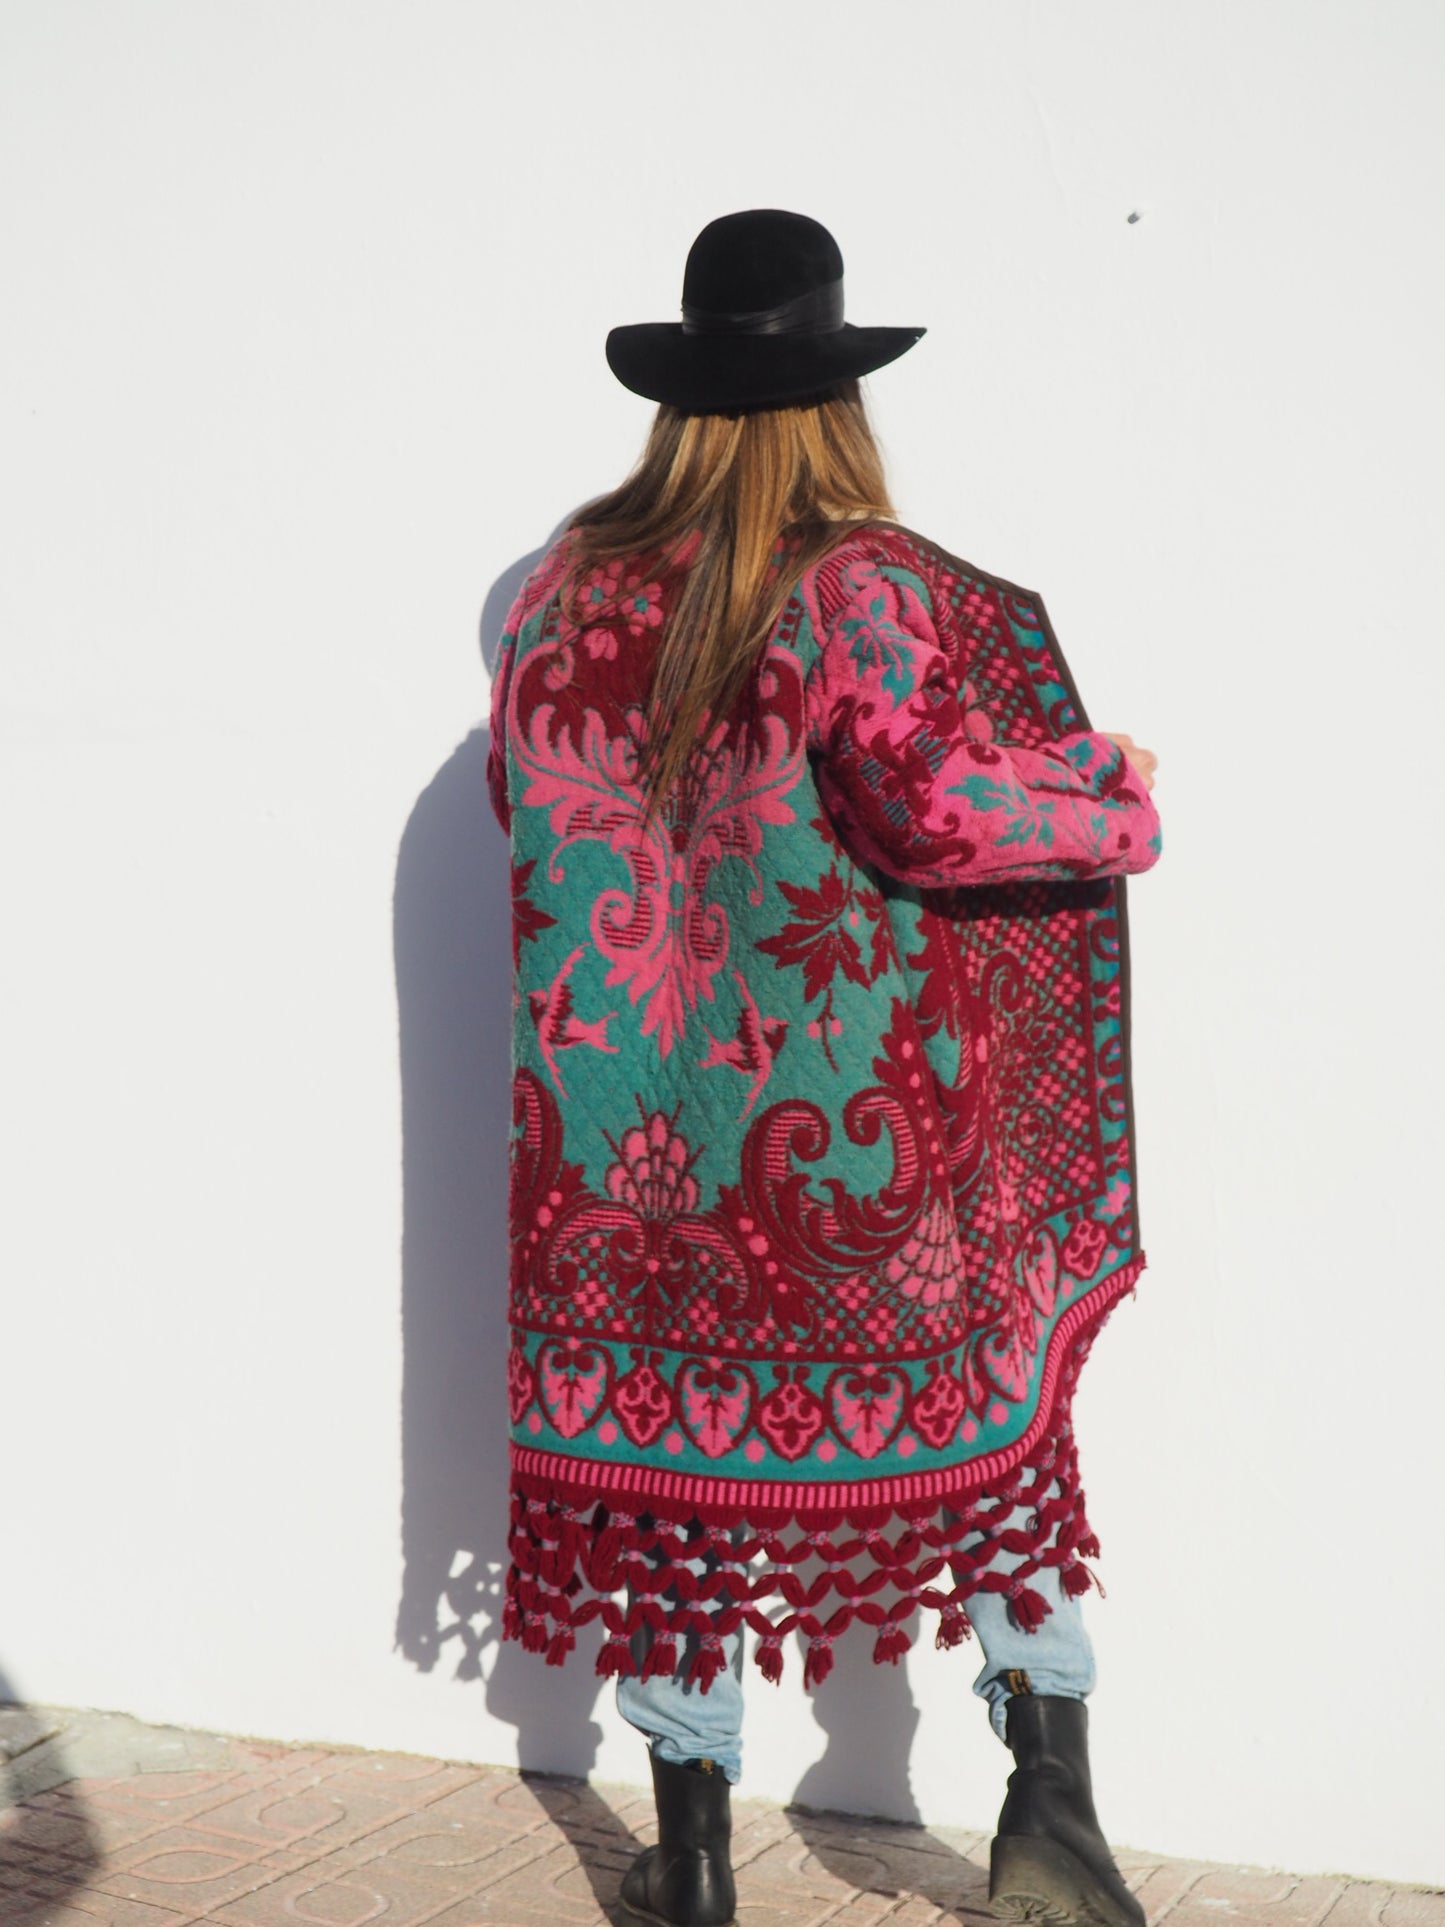 Amazing vintage woven tapestry jacket with insane oversize tassel trim up-cycled by Vagabond Ibiza